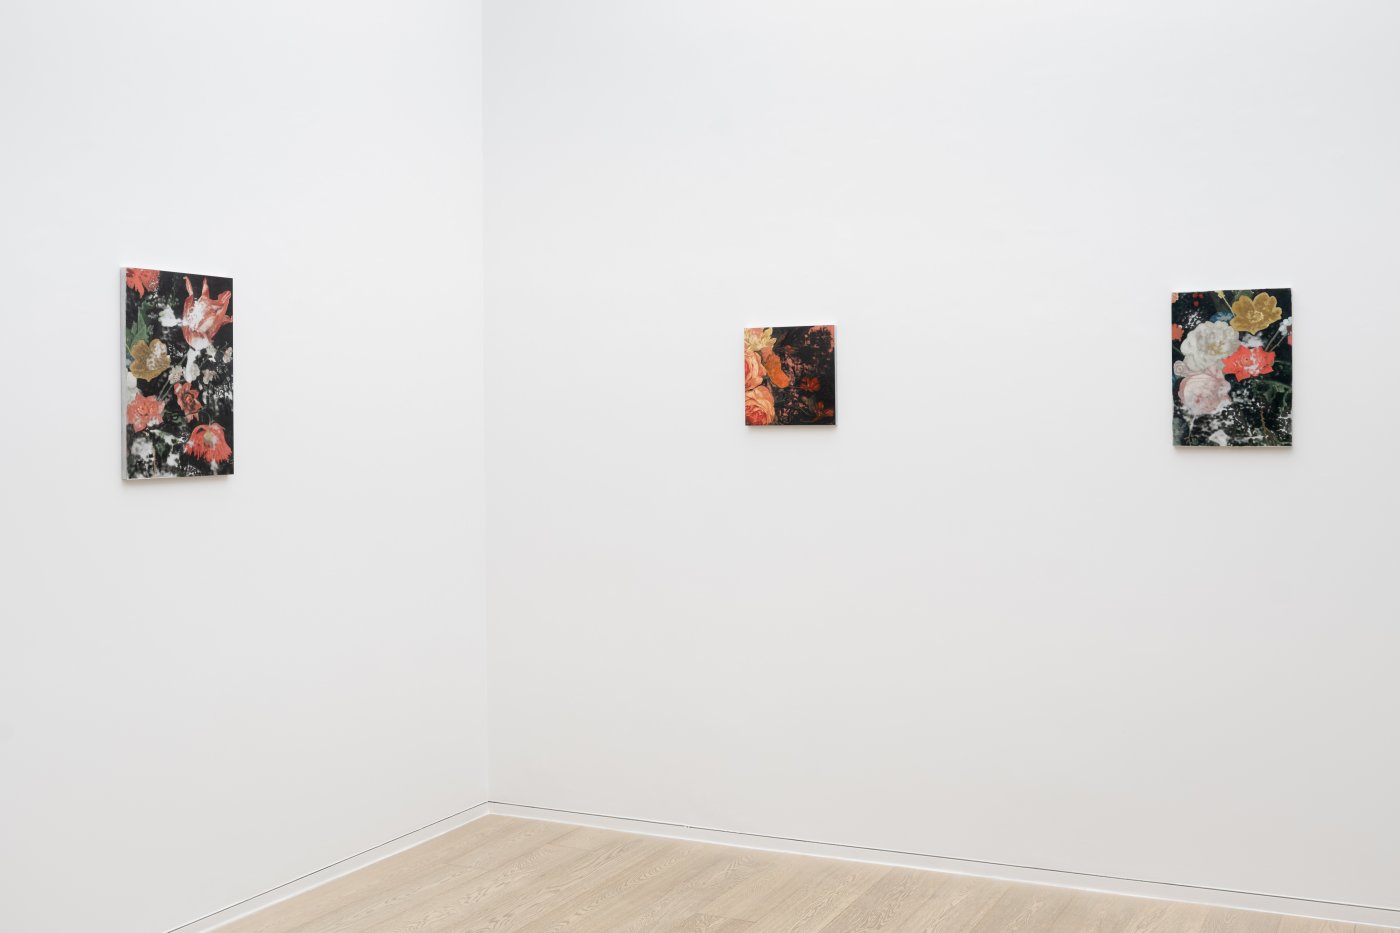 Installation image for Toby Ziegler: Pronk, at Simon Lee Gallery